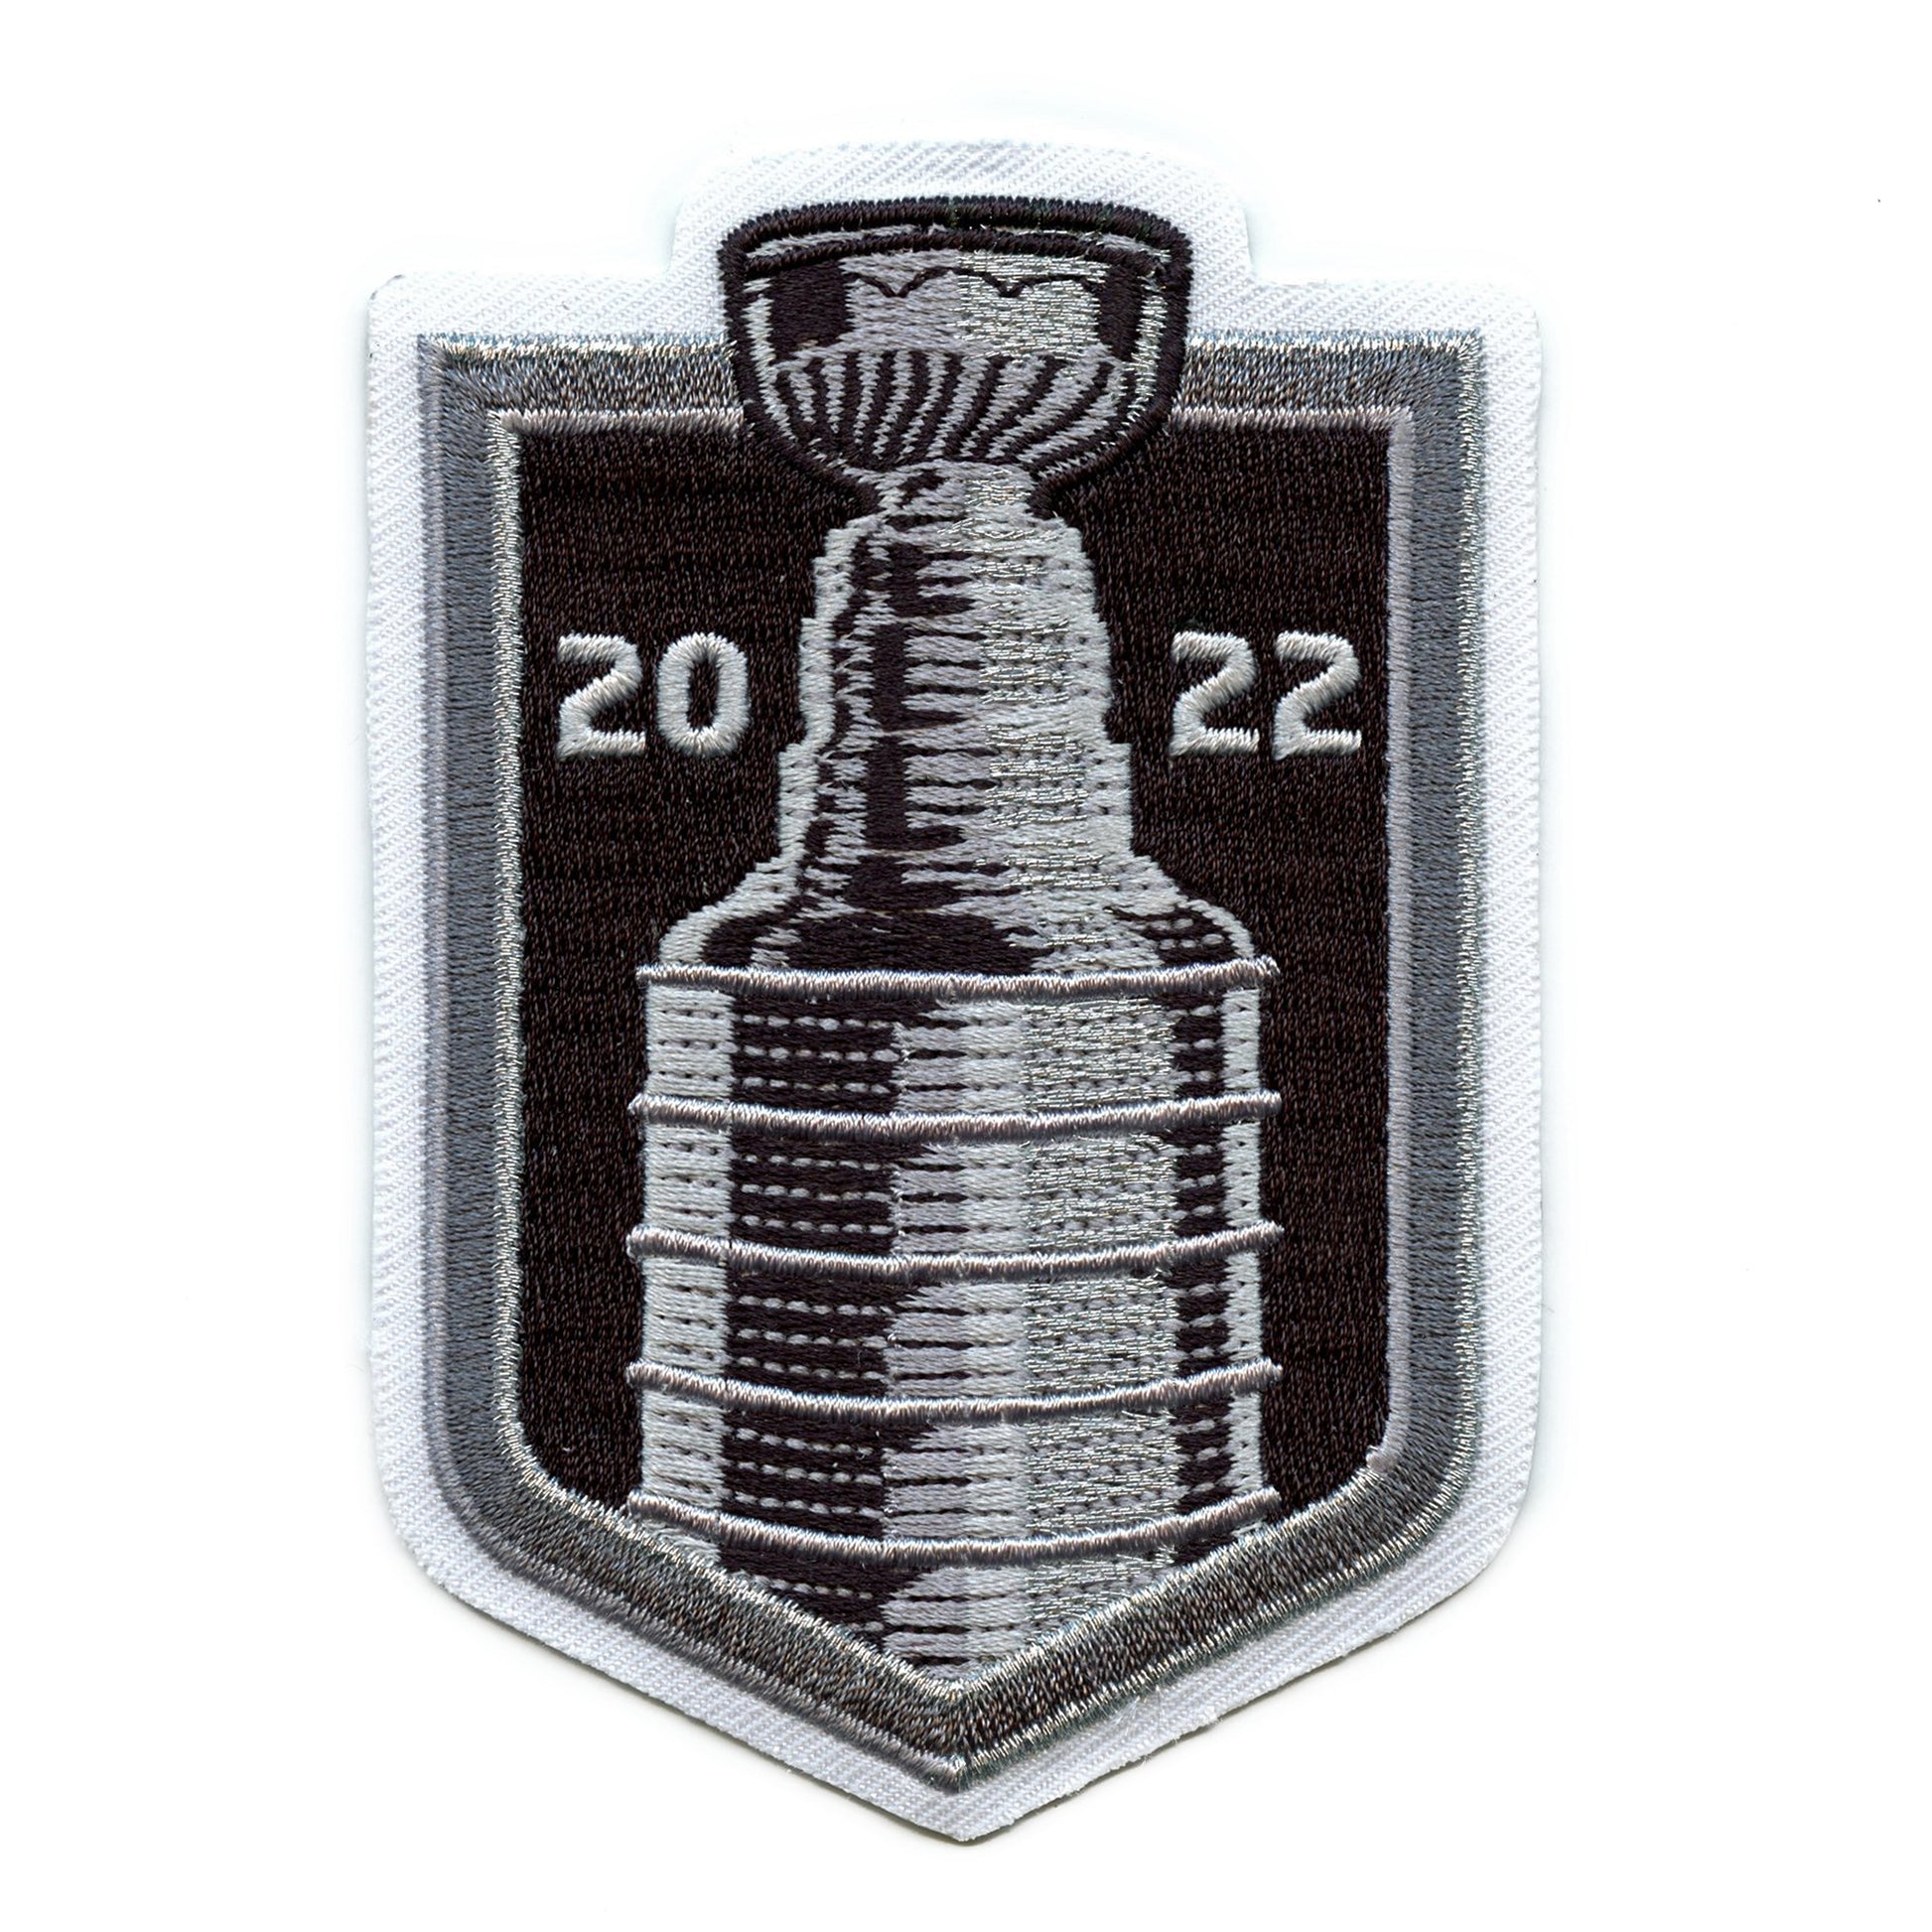 AAtJ Open Post for the 2022 NHL Stanley Cup Finals - All About The Jersey